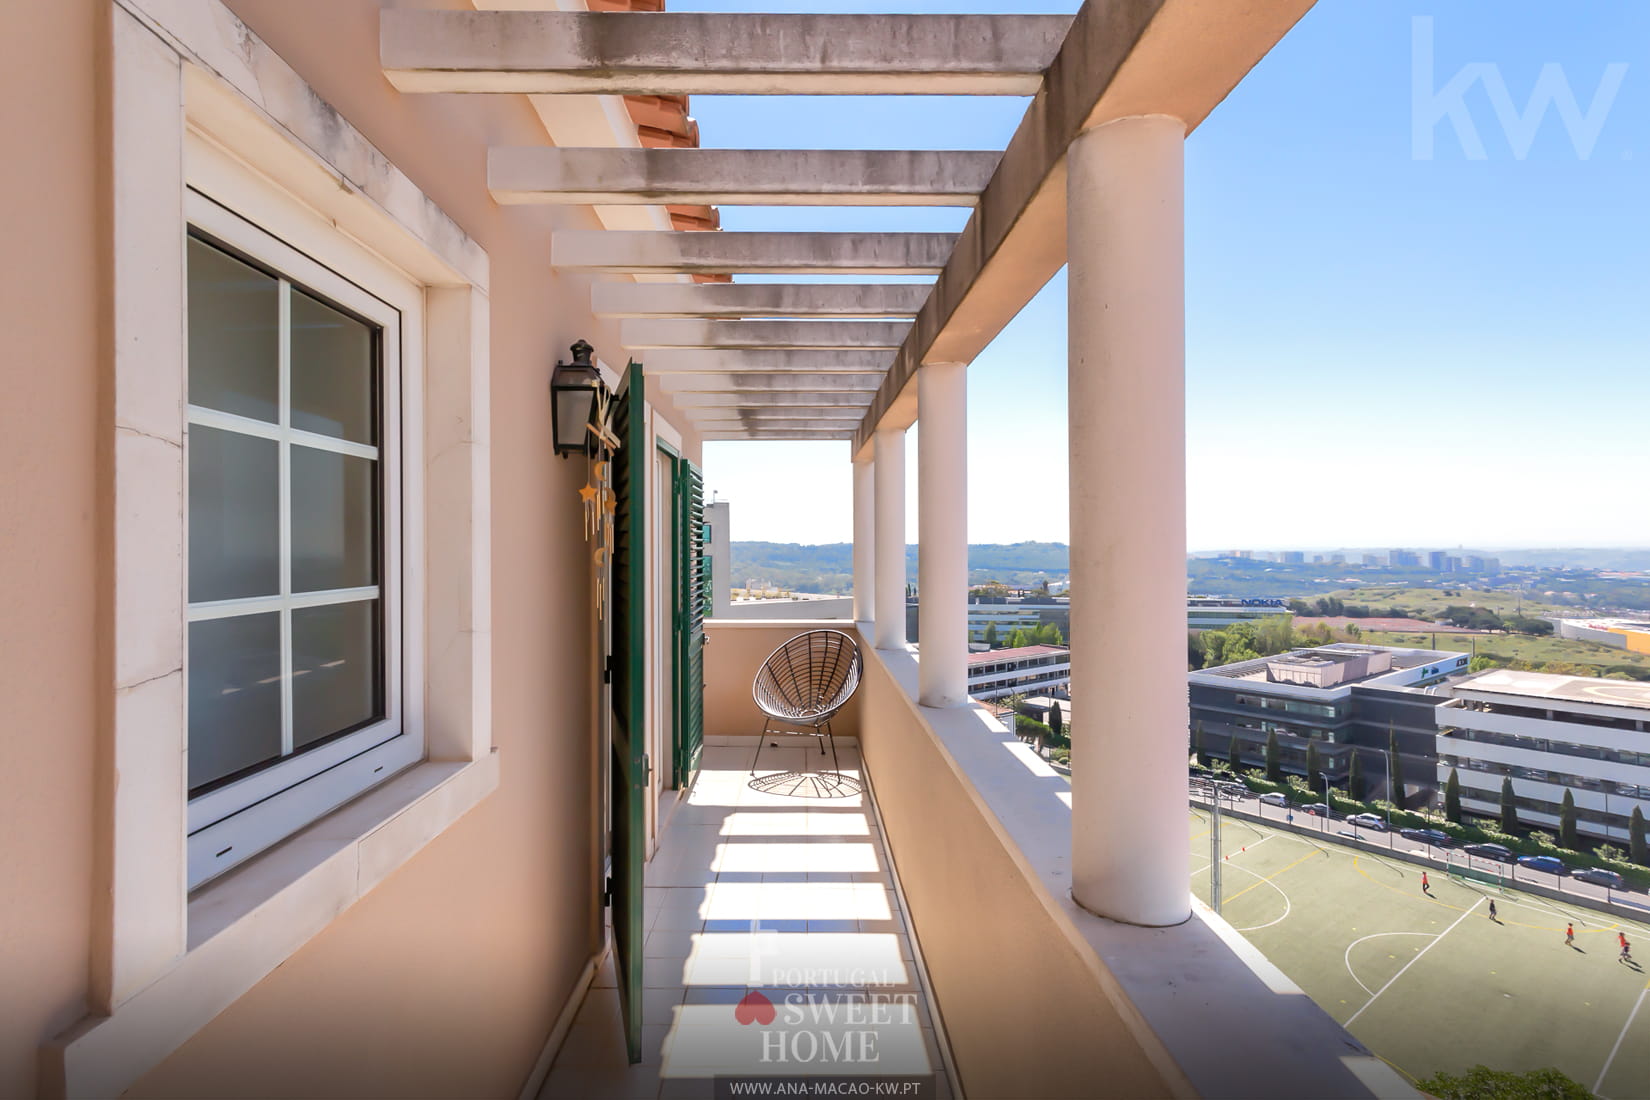 Balcony of the rooms with unobstructed view